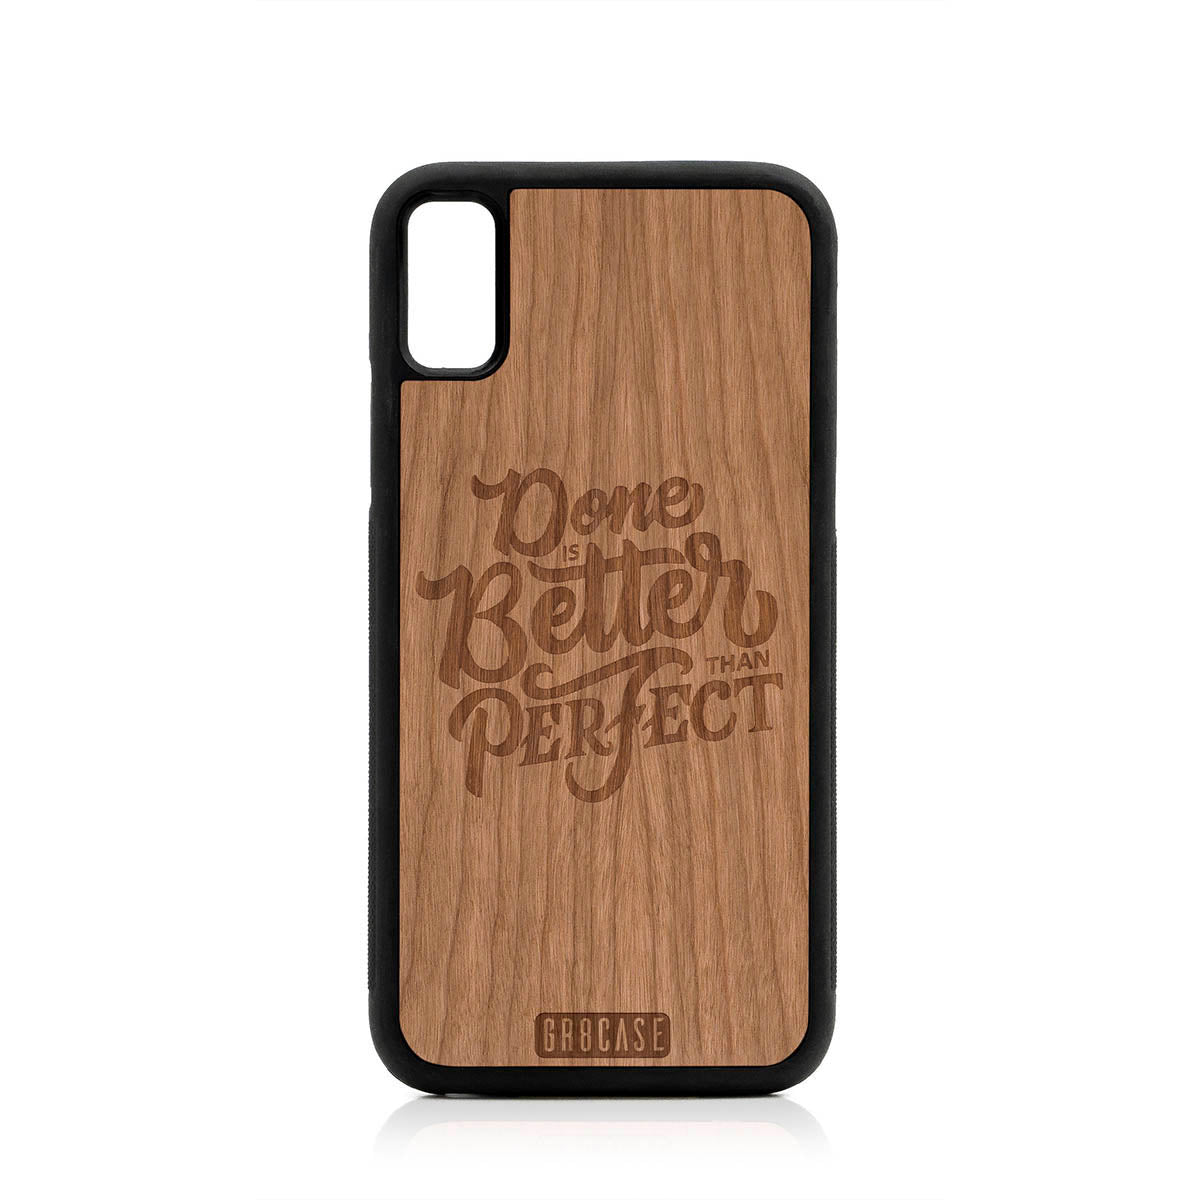 Done Is Better Than Perfect Design Wood Case For iPhone X/XS by GR8CASE